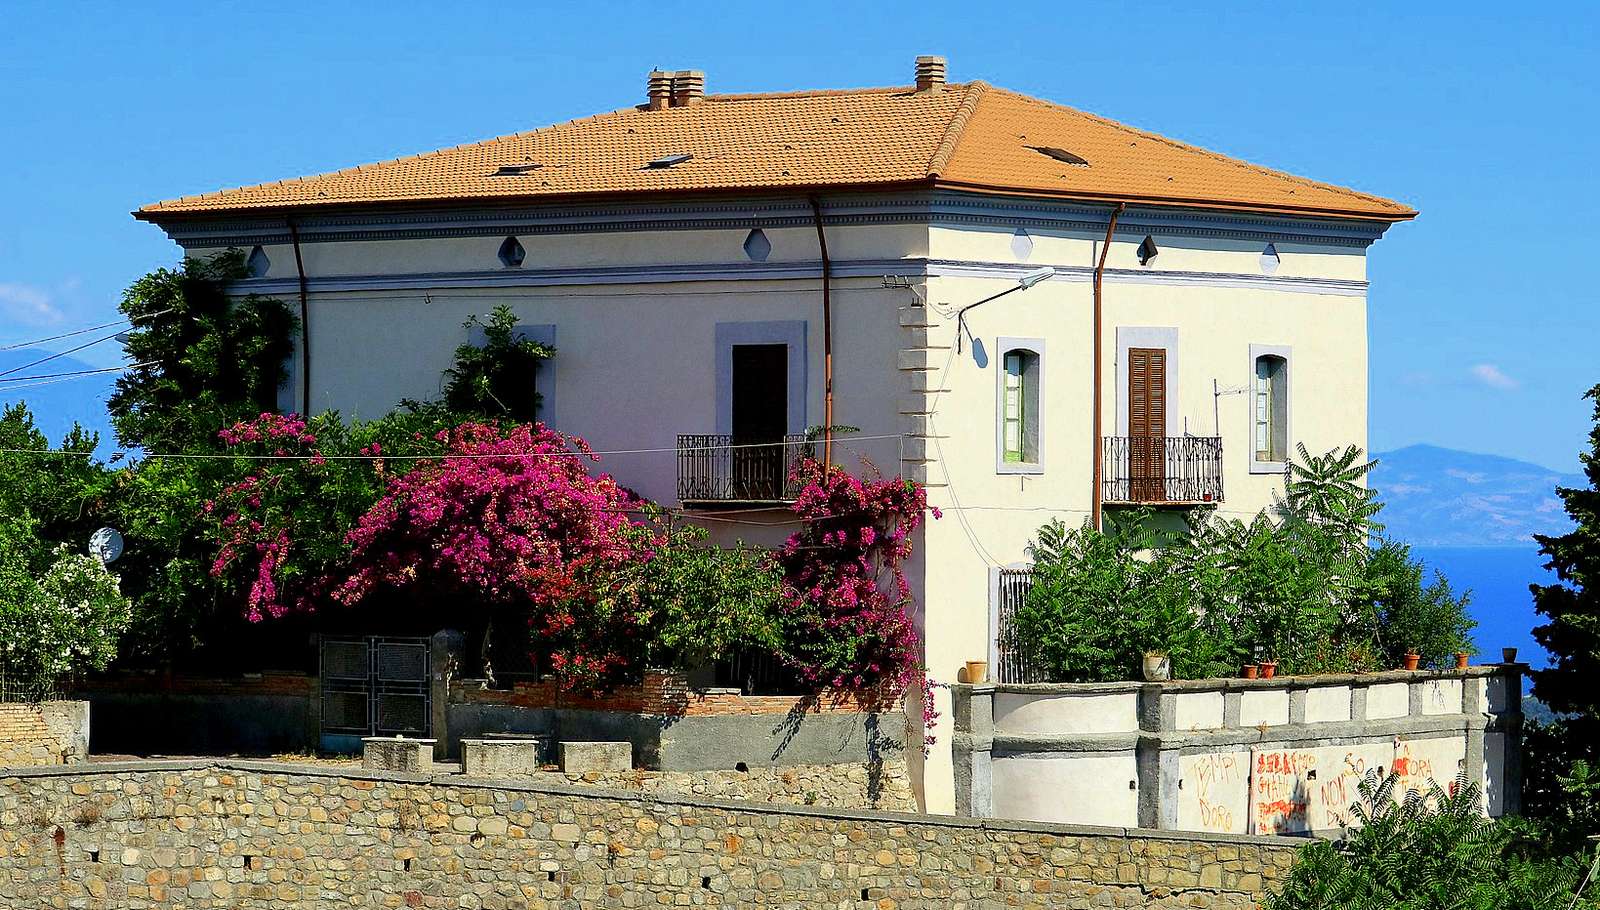 House on the hill (Crosia, Calabria) online puzzle